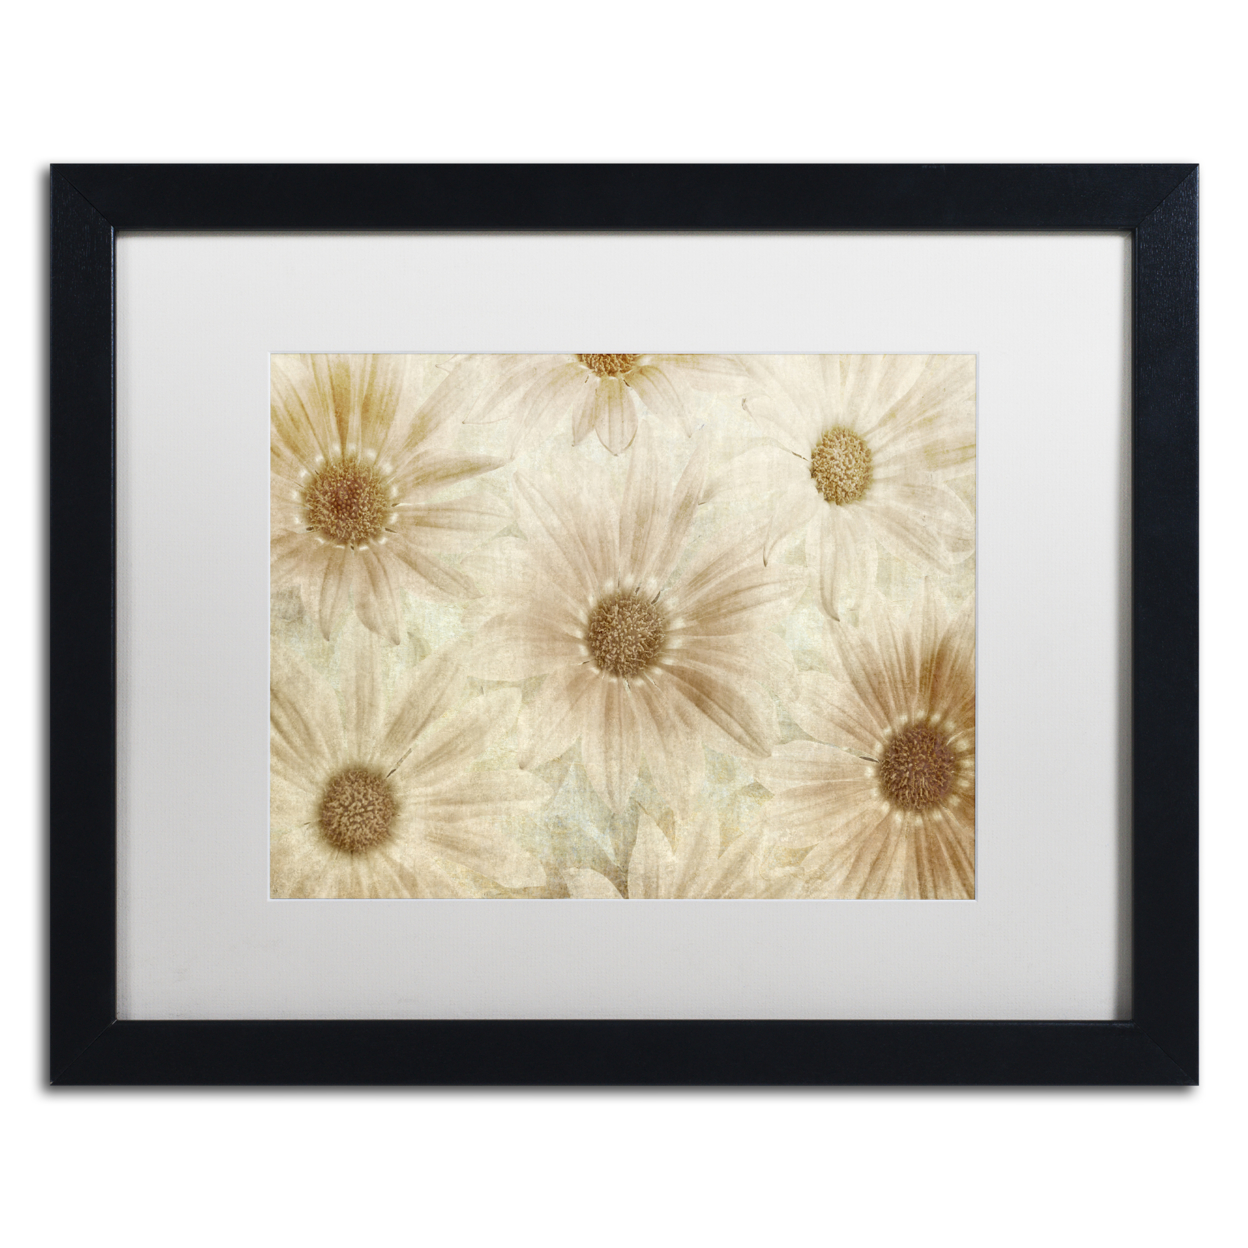 Cora Niele 'Vintage Daisies' Black Wooden Framed Art 18 X 22 Inches